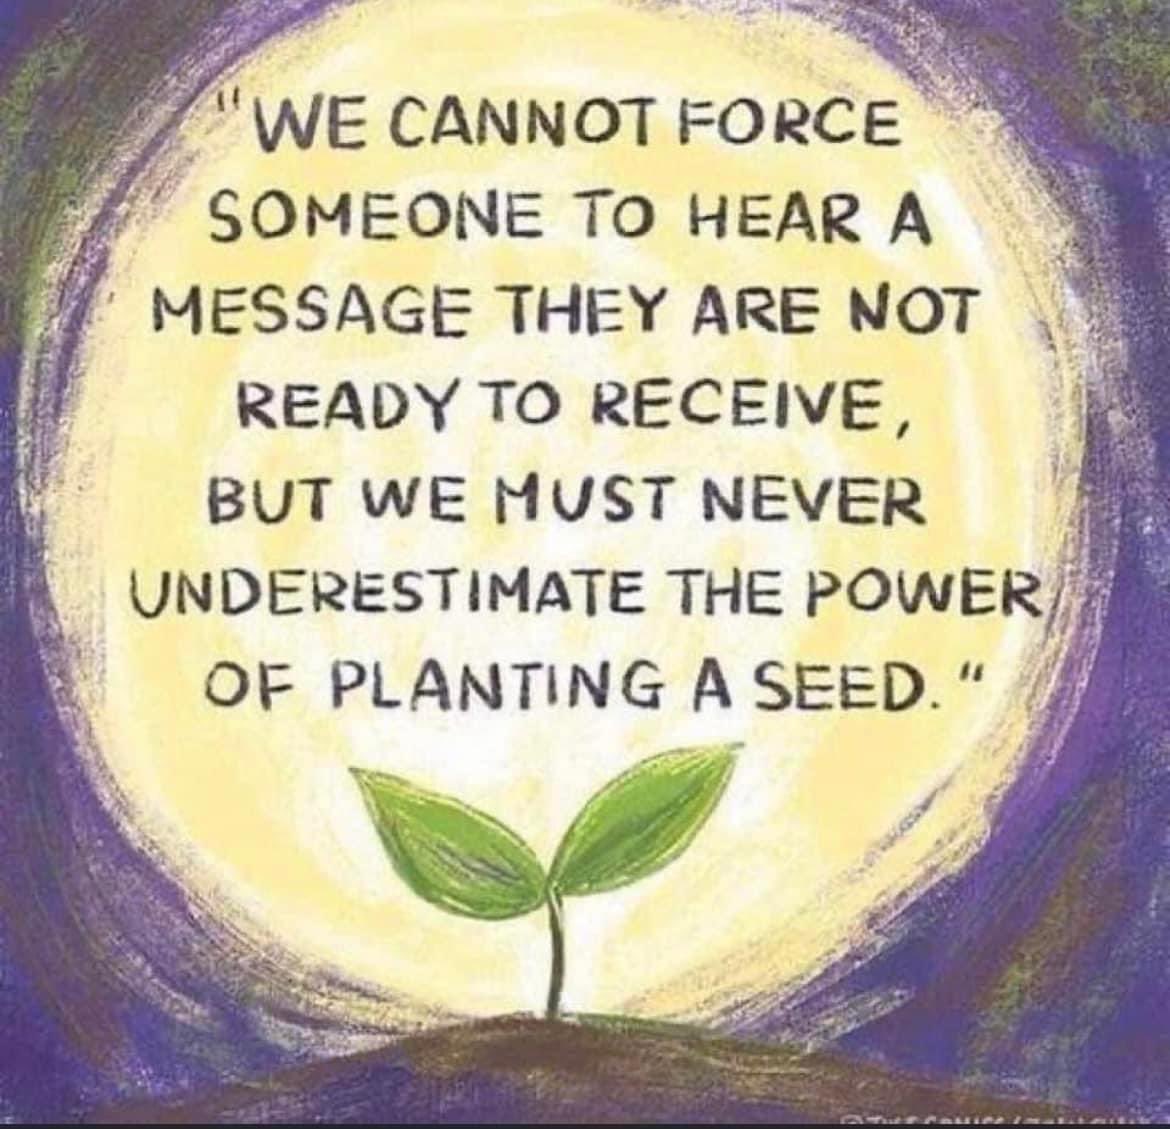 Planting seeds in positive ways can lead to big changes. Never stop trying to open perspectives and believe the good in others will shine through. 

#RAMPisinclusion #RAMPredbag #ADA34 #betheIDEA #TinaTables #unapologeticallyme #accessibilitymatters #inclusionmatters #wheellife